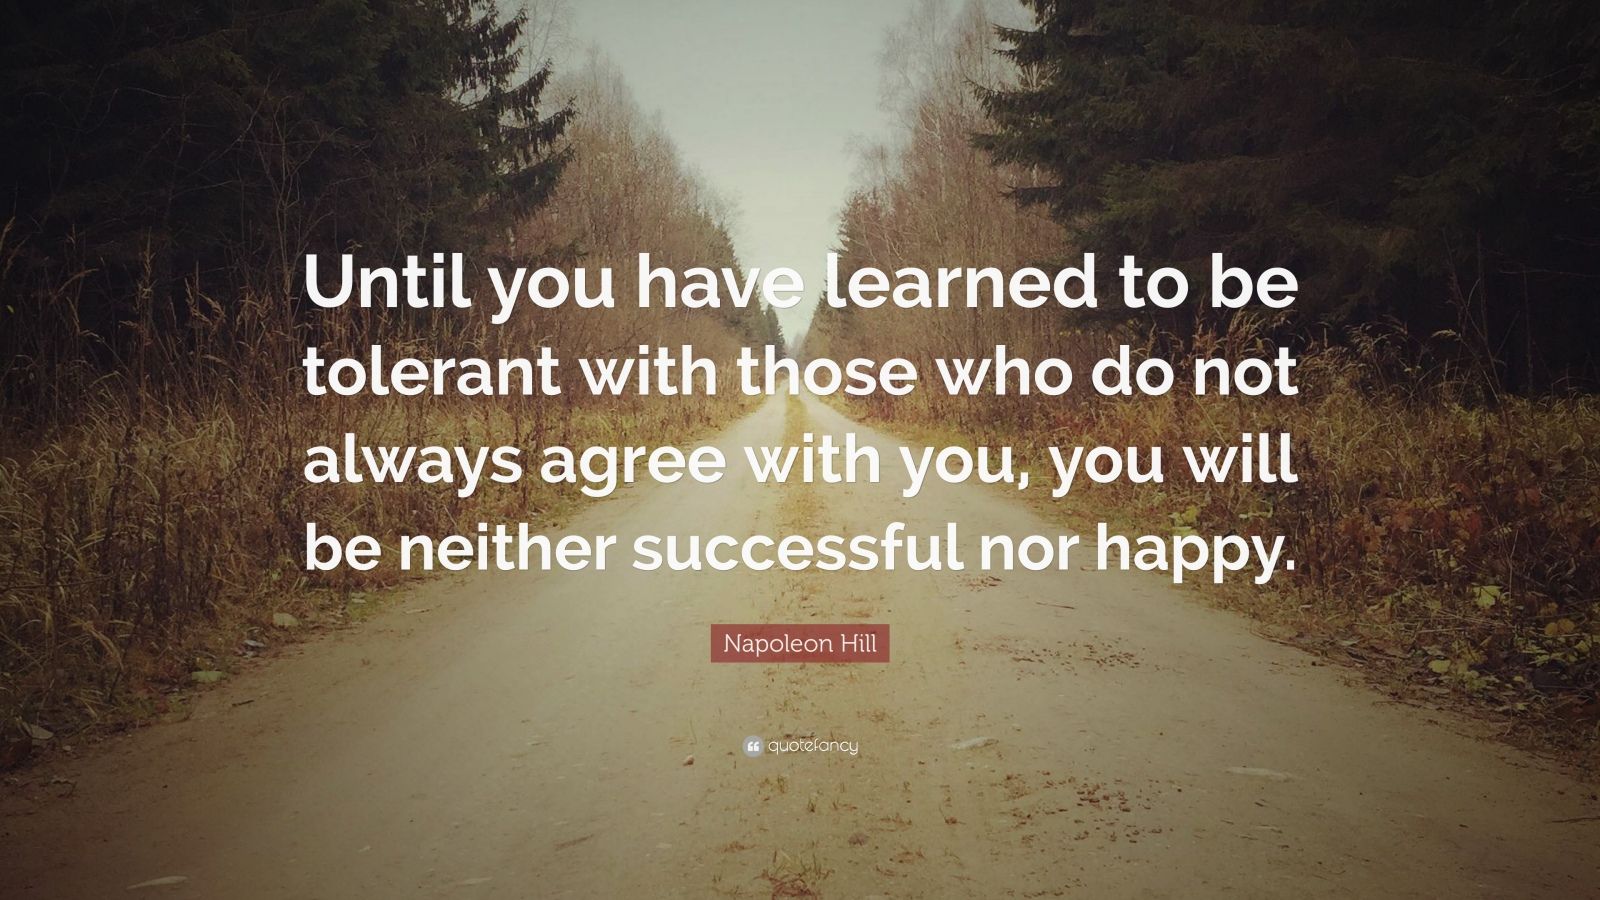 Napoleon Hill Quote “Until you have learned to be